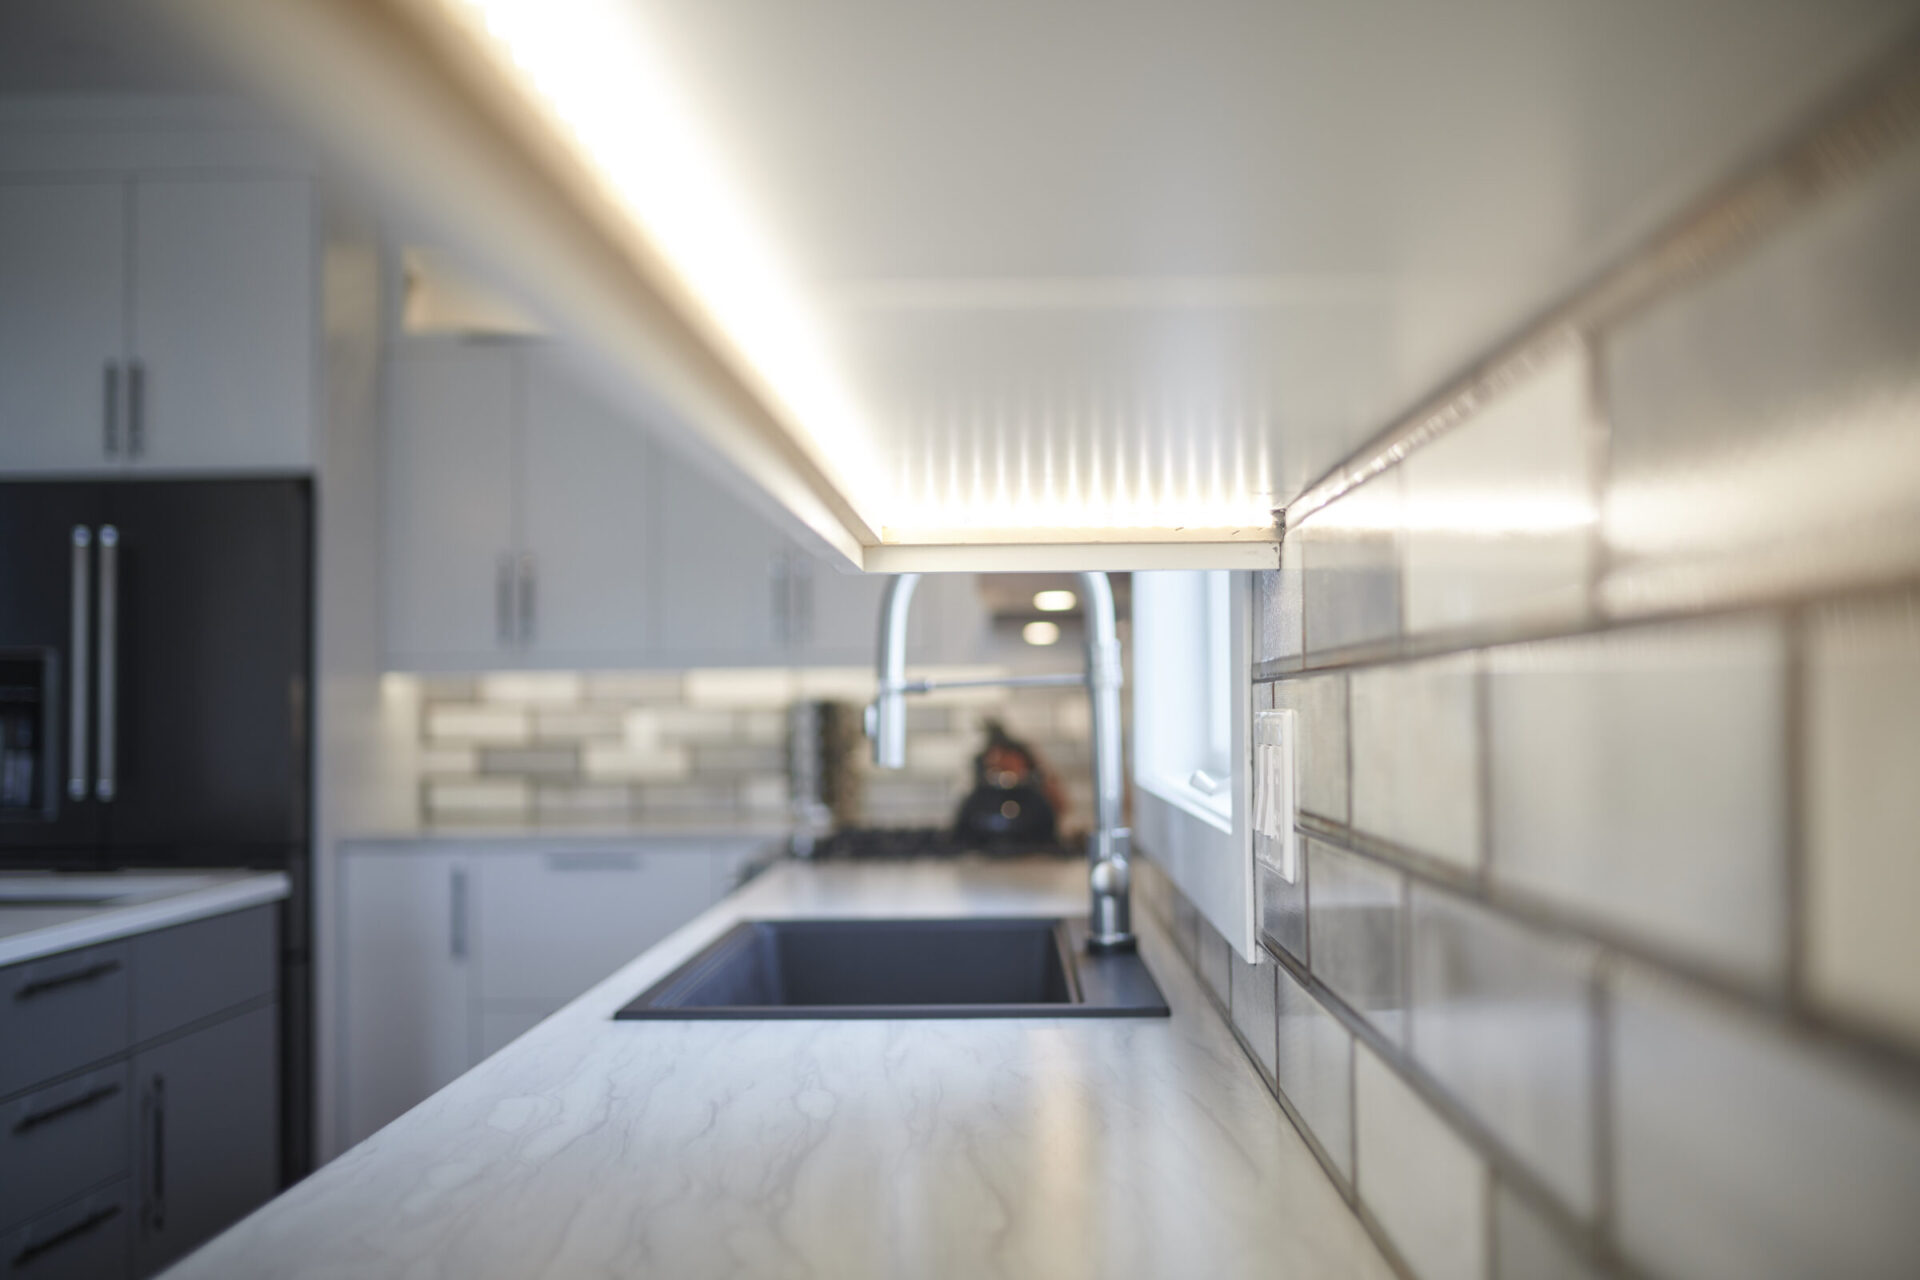 Modern kitchen interior with under-cabinet lighting, tiled backsplash, marble countertop, and a blurred background hinting at sleek appliances. Focus is on the light reflection.